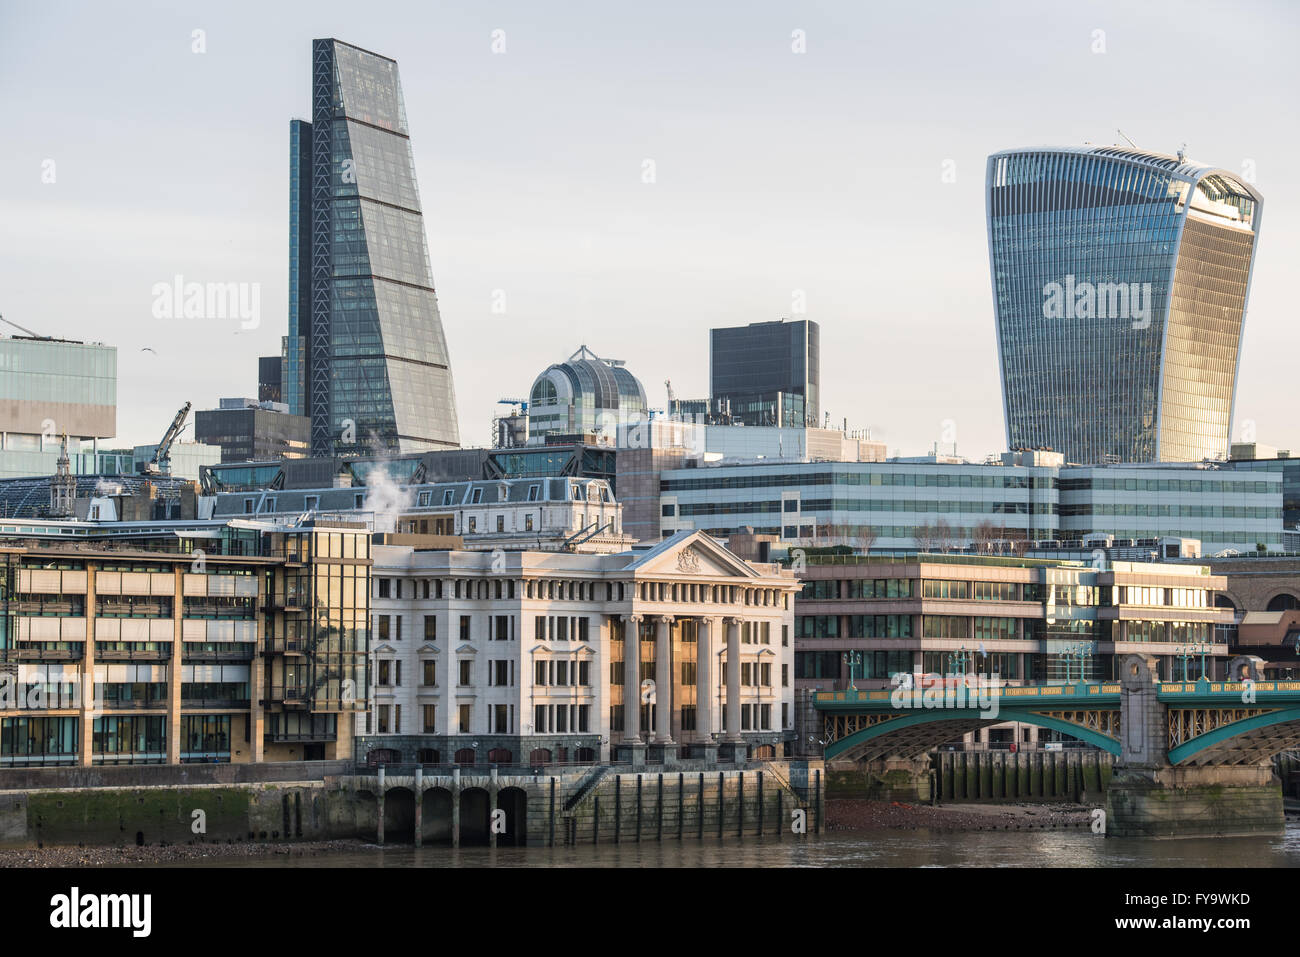 City of London skyline featuring The Cheesegrater (Leadenhall Building) and The Walkie-Talkie (20 Fenchurch Street) skyscrapers Stock Photo